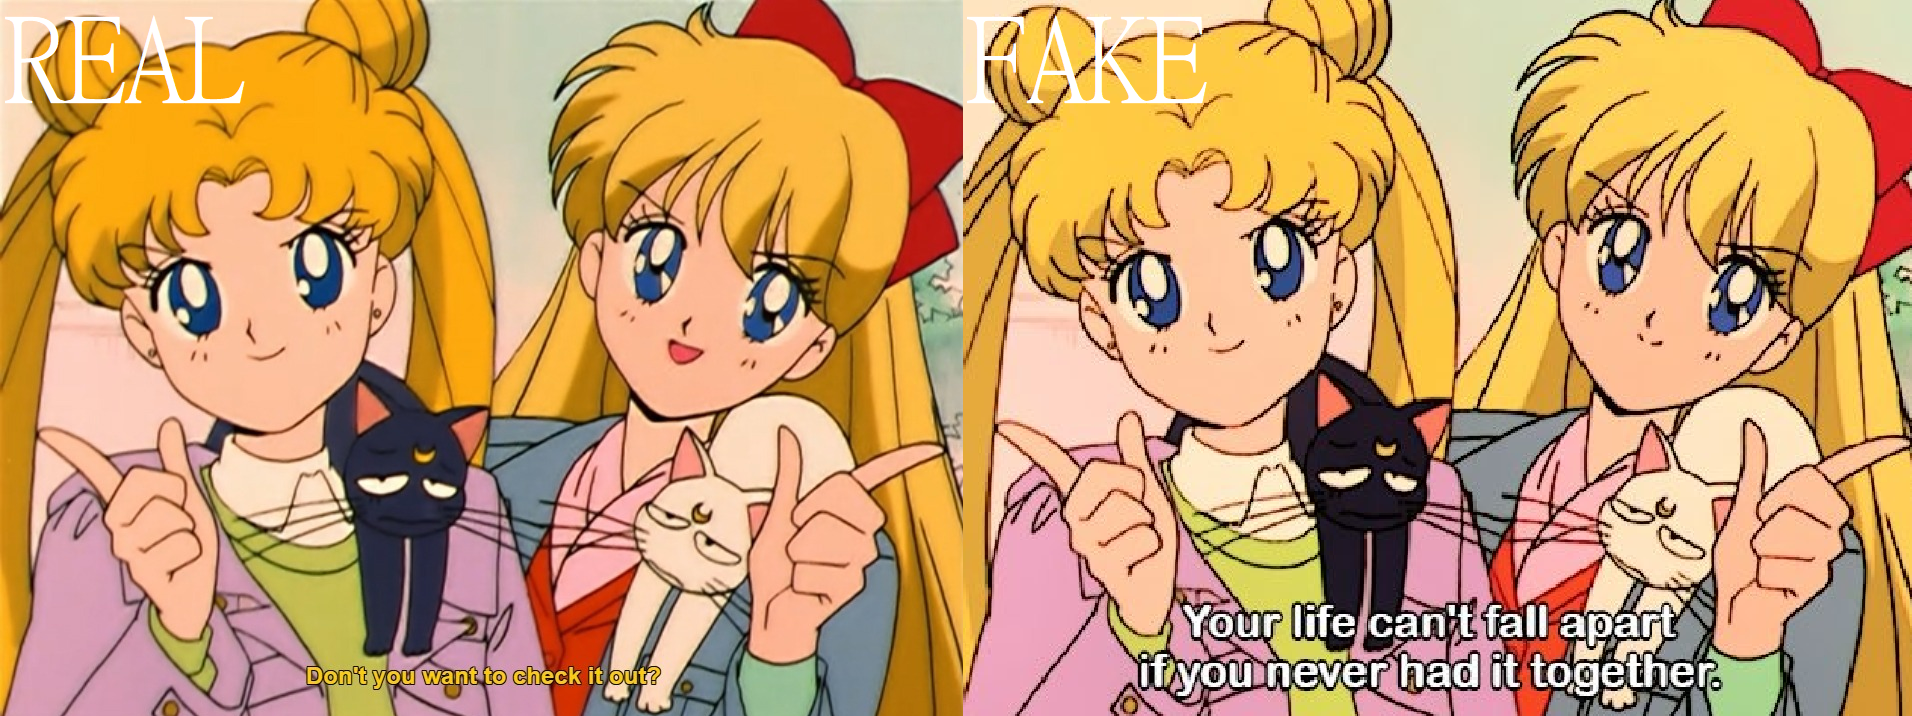 A side by side comparison of a real Sailor Moon screenshot, in which the subtitles read 'Don't you want to check it out?' and a fake version reading 'Your life can't fall apart if you never had it together'